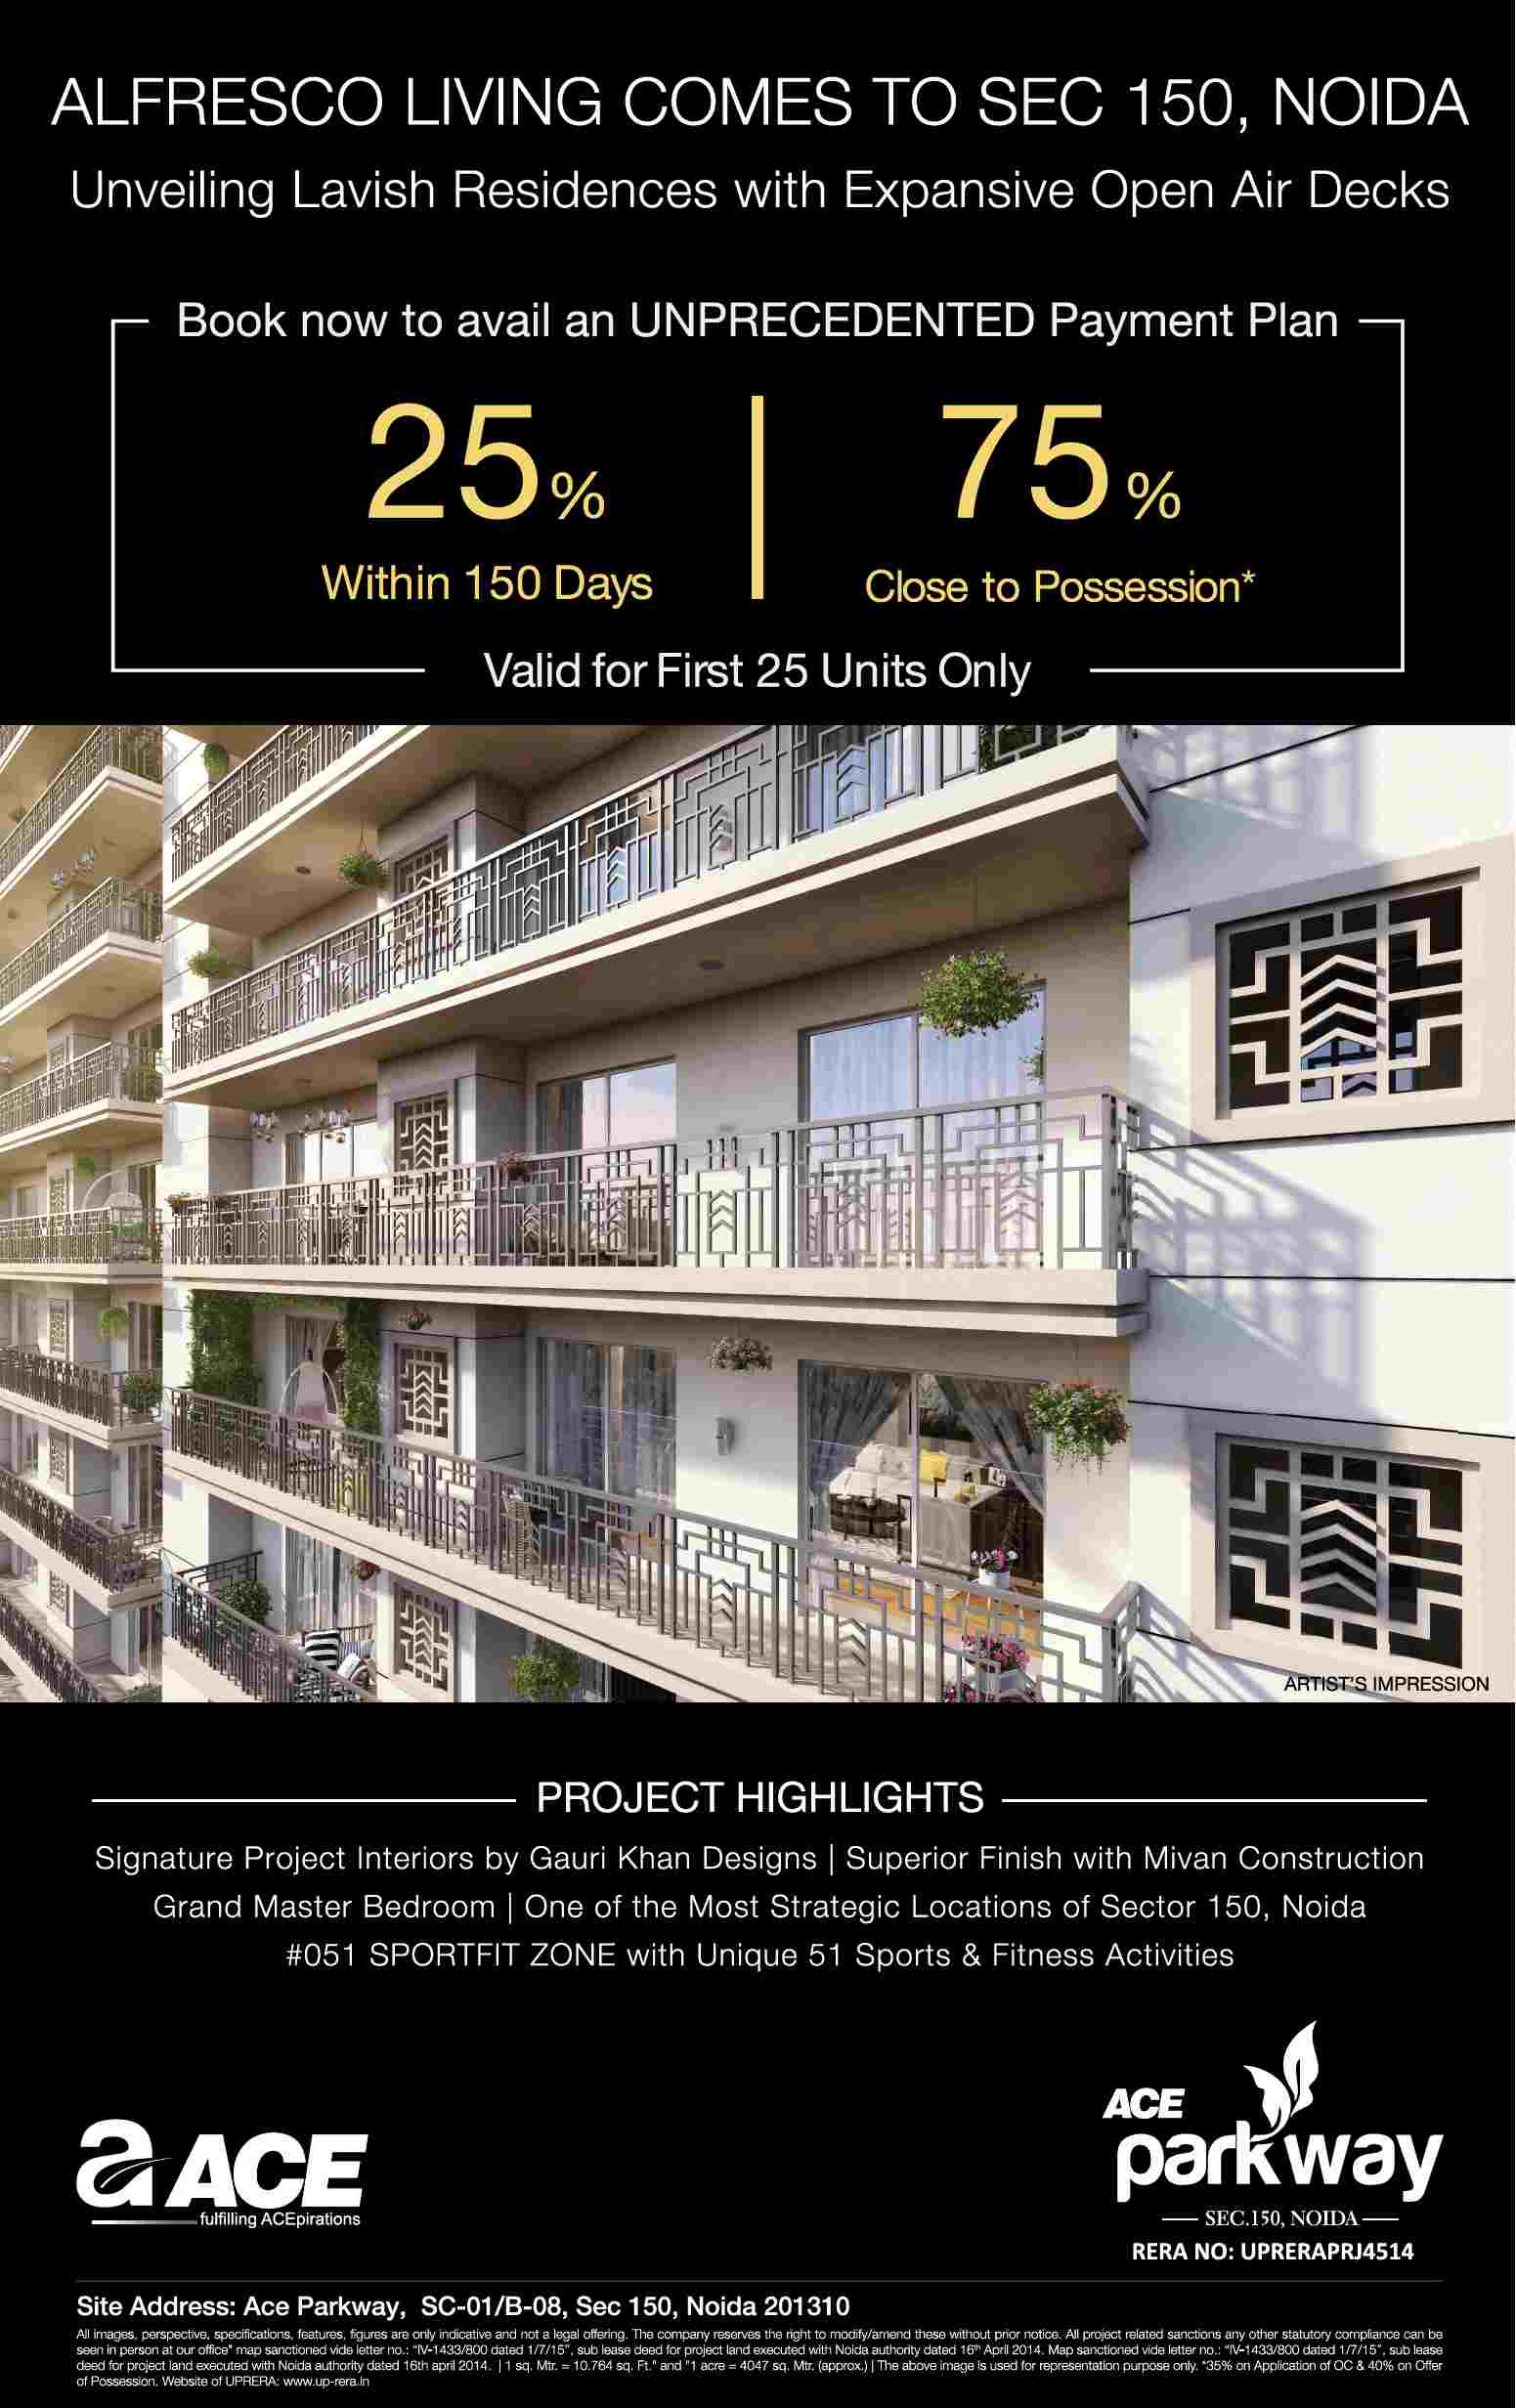 Book now & avail an unprecedented payment plan at Ace Parkway in Noida Update